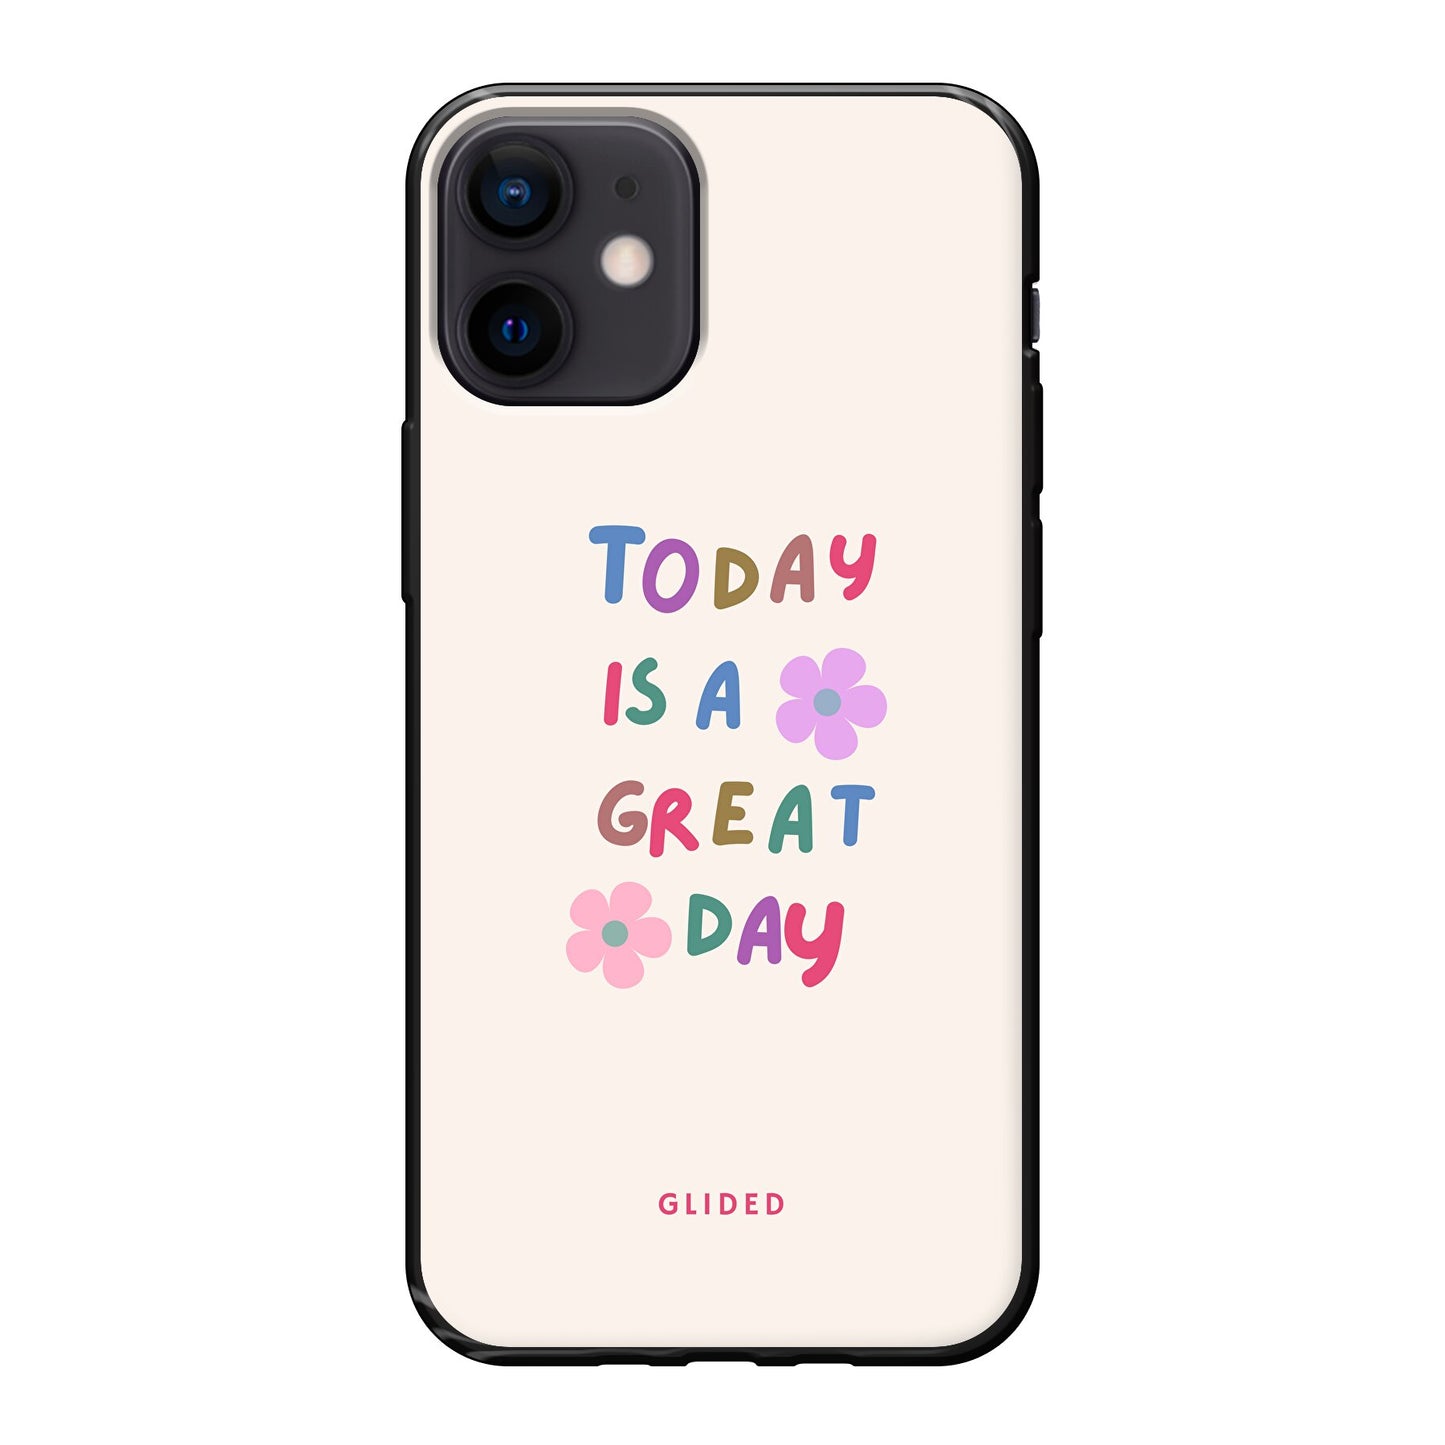 Great Day - iPhone 12 mini Handyhülle Soft case